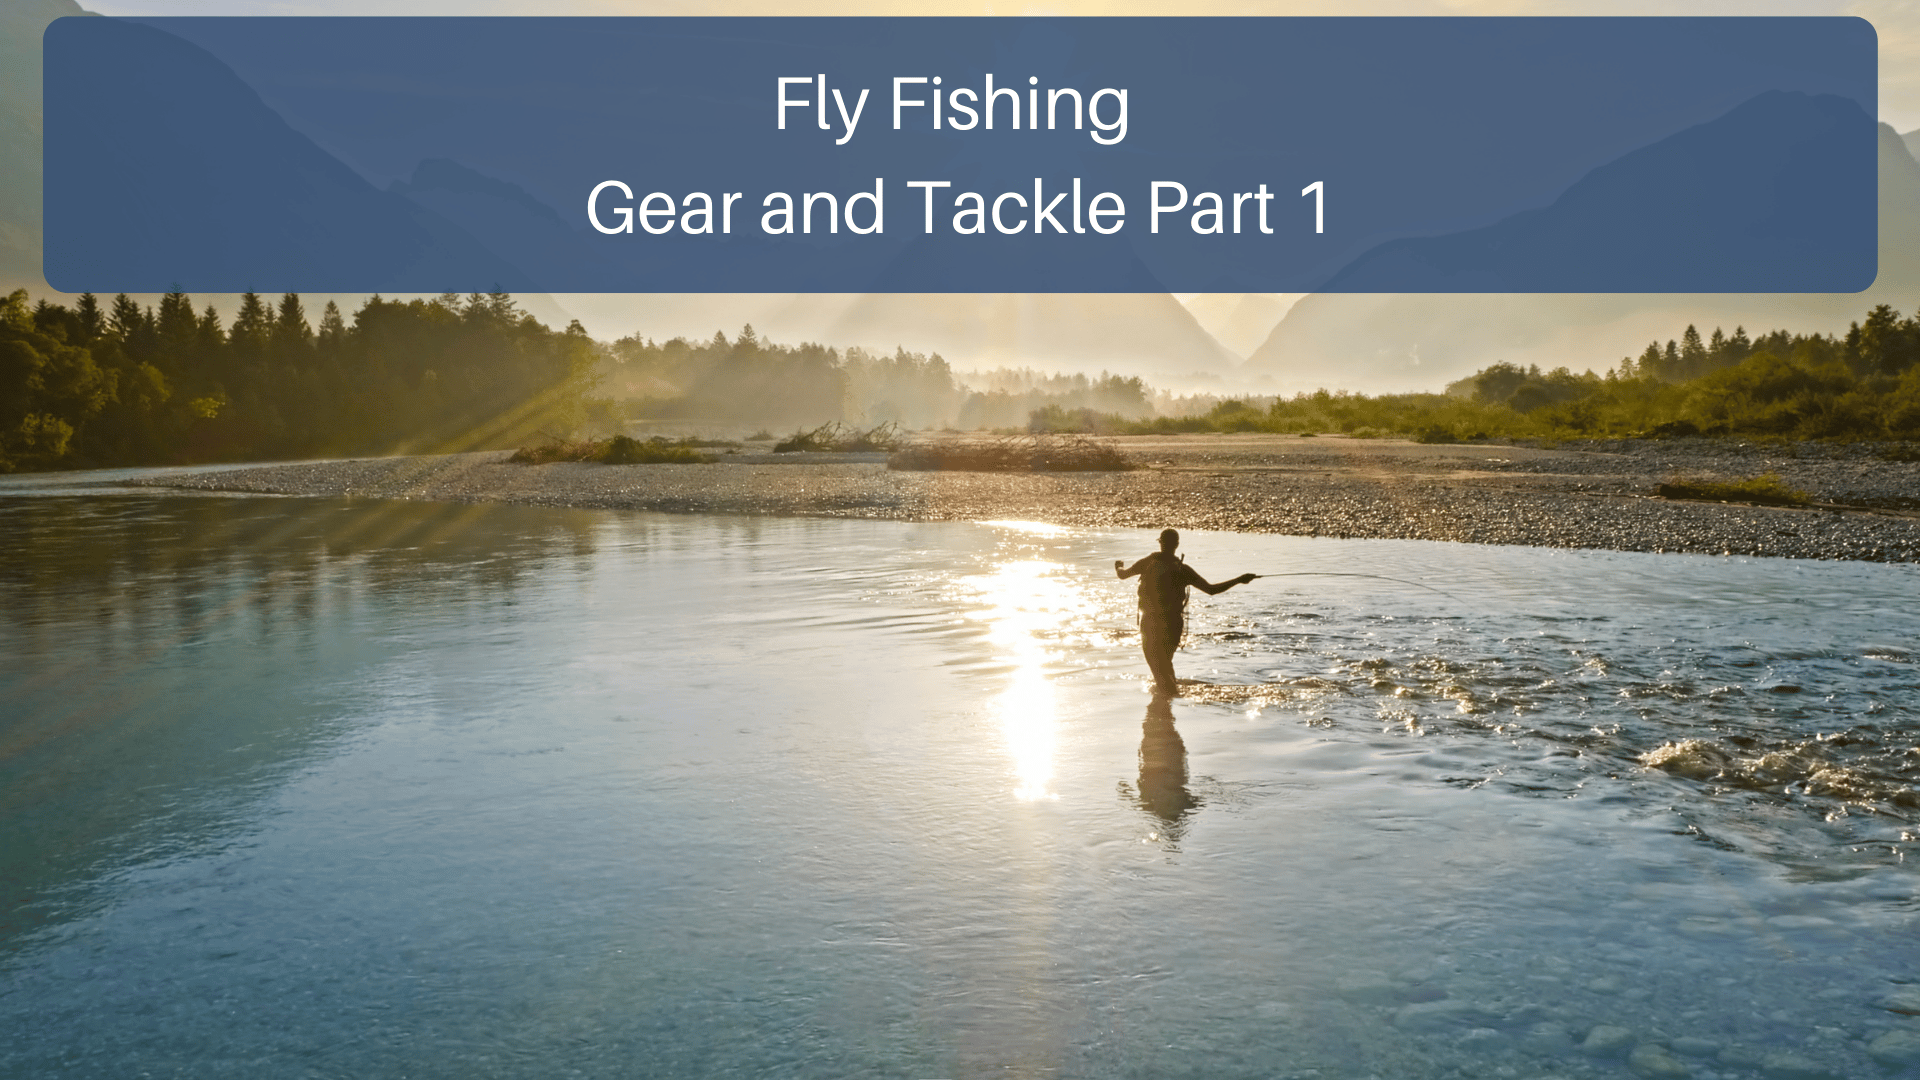 Fly Fishing Gear & Tackle: Part 1